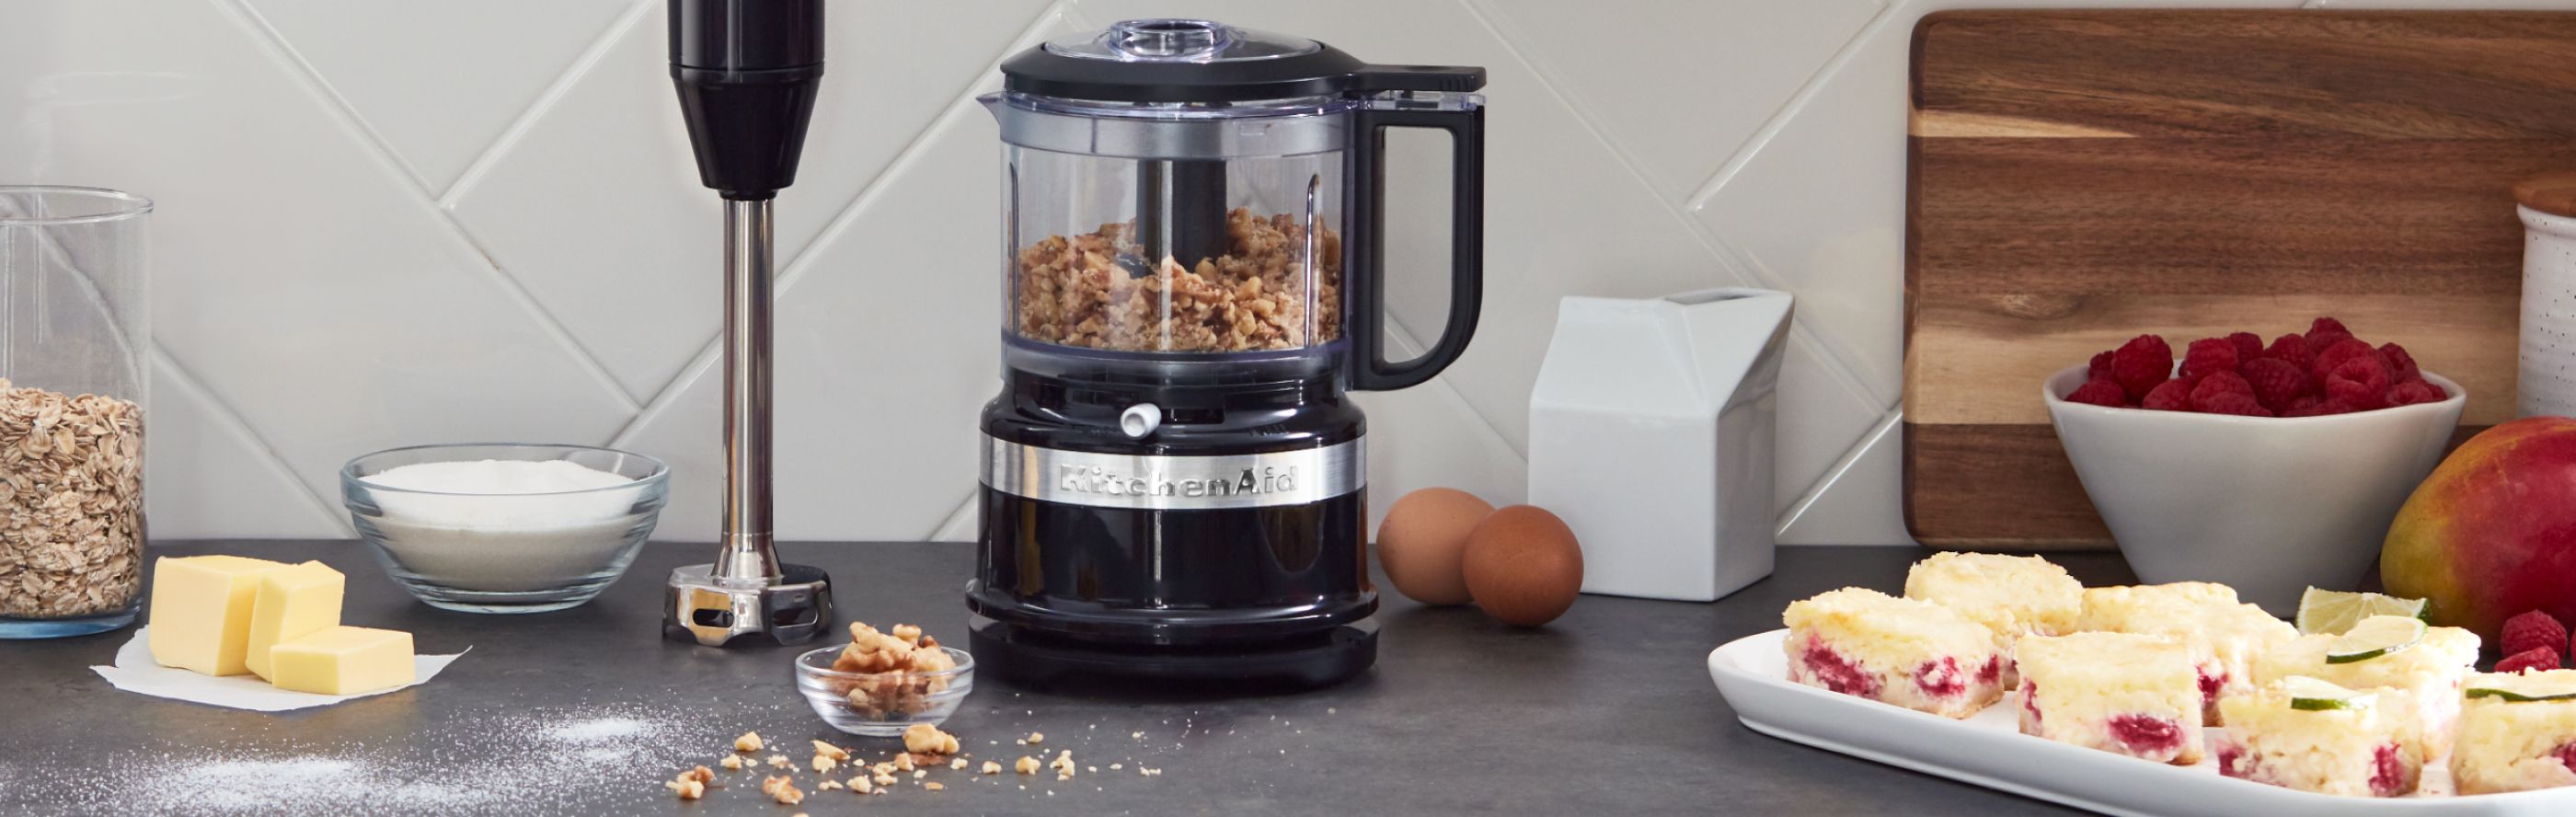 A KitchenAid® food processor and immersion blender on a countertop